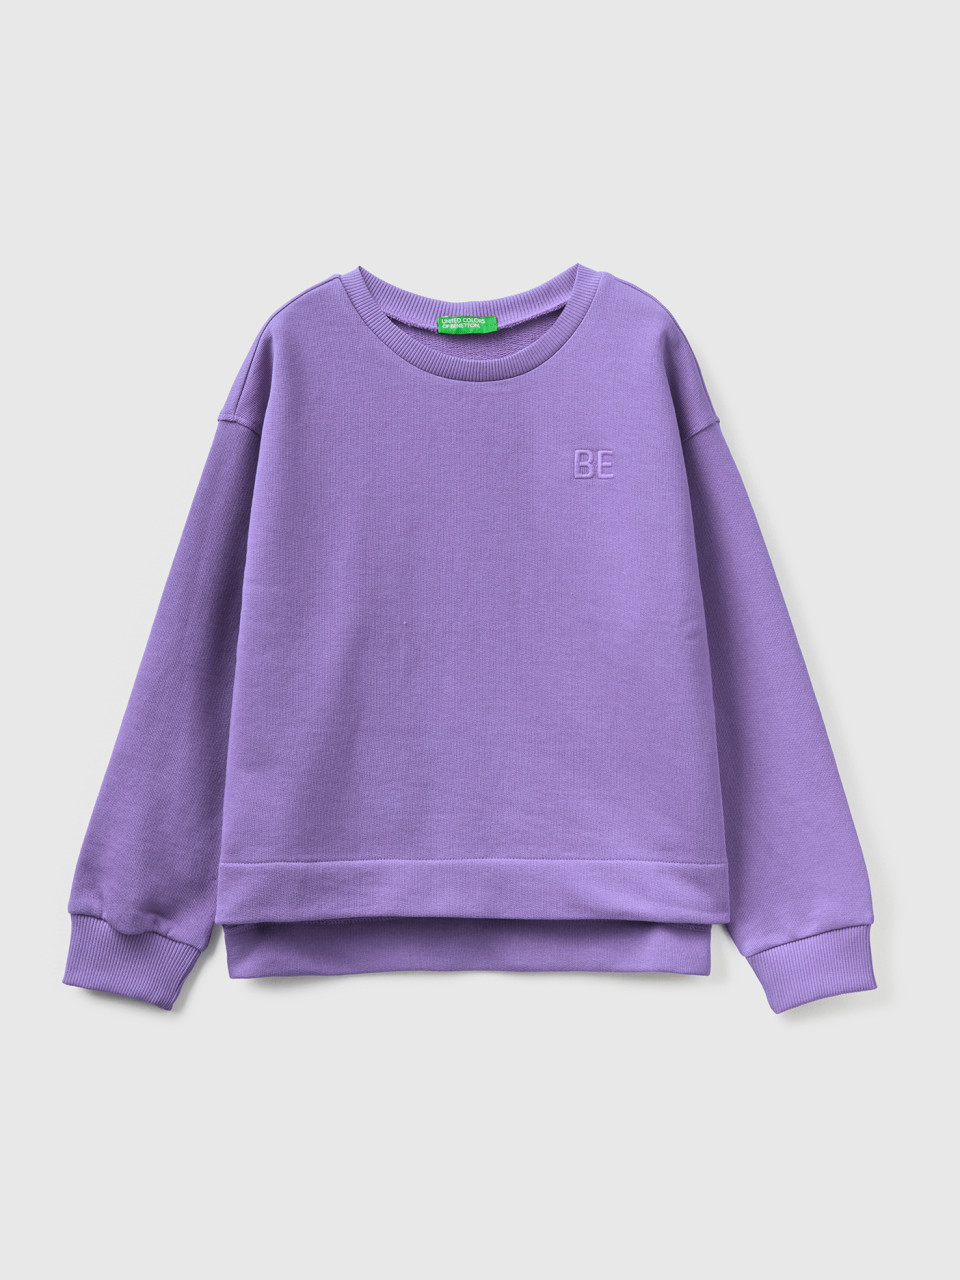 Benetton, Sweatshirt With be Embroidery, Lilac, Kids